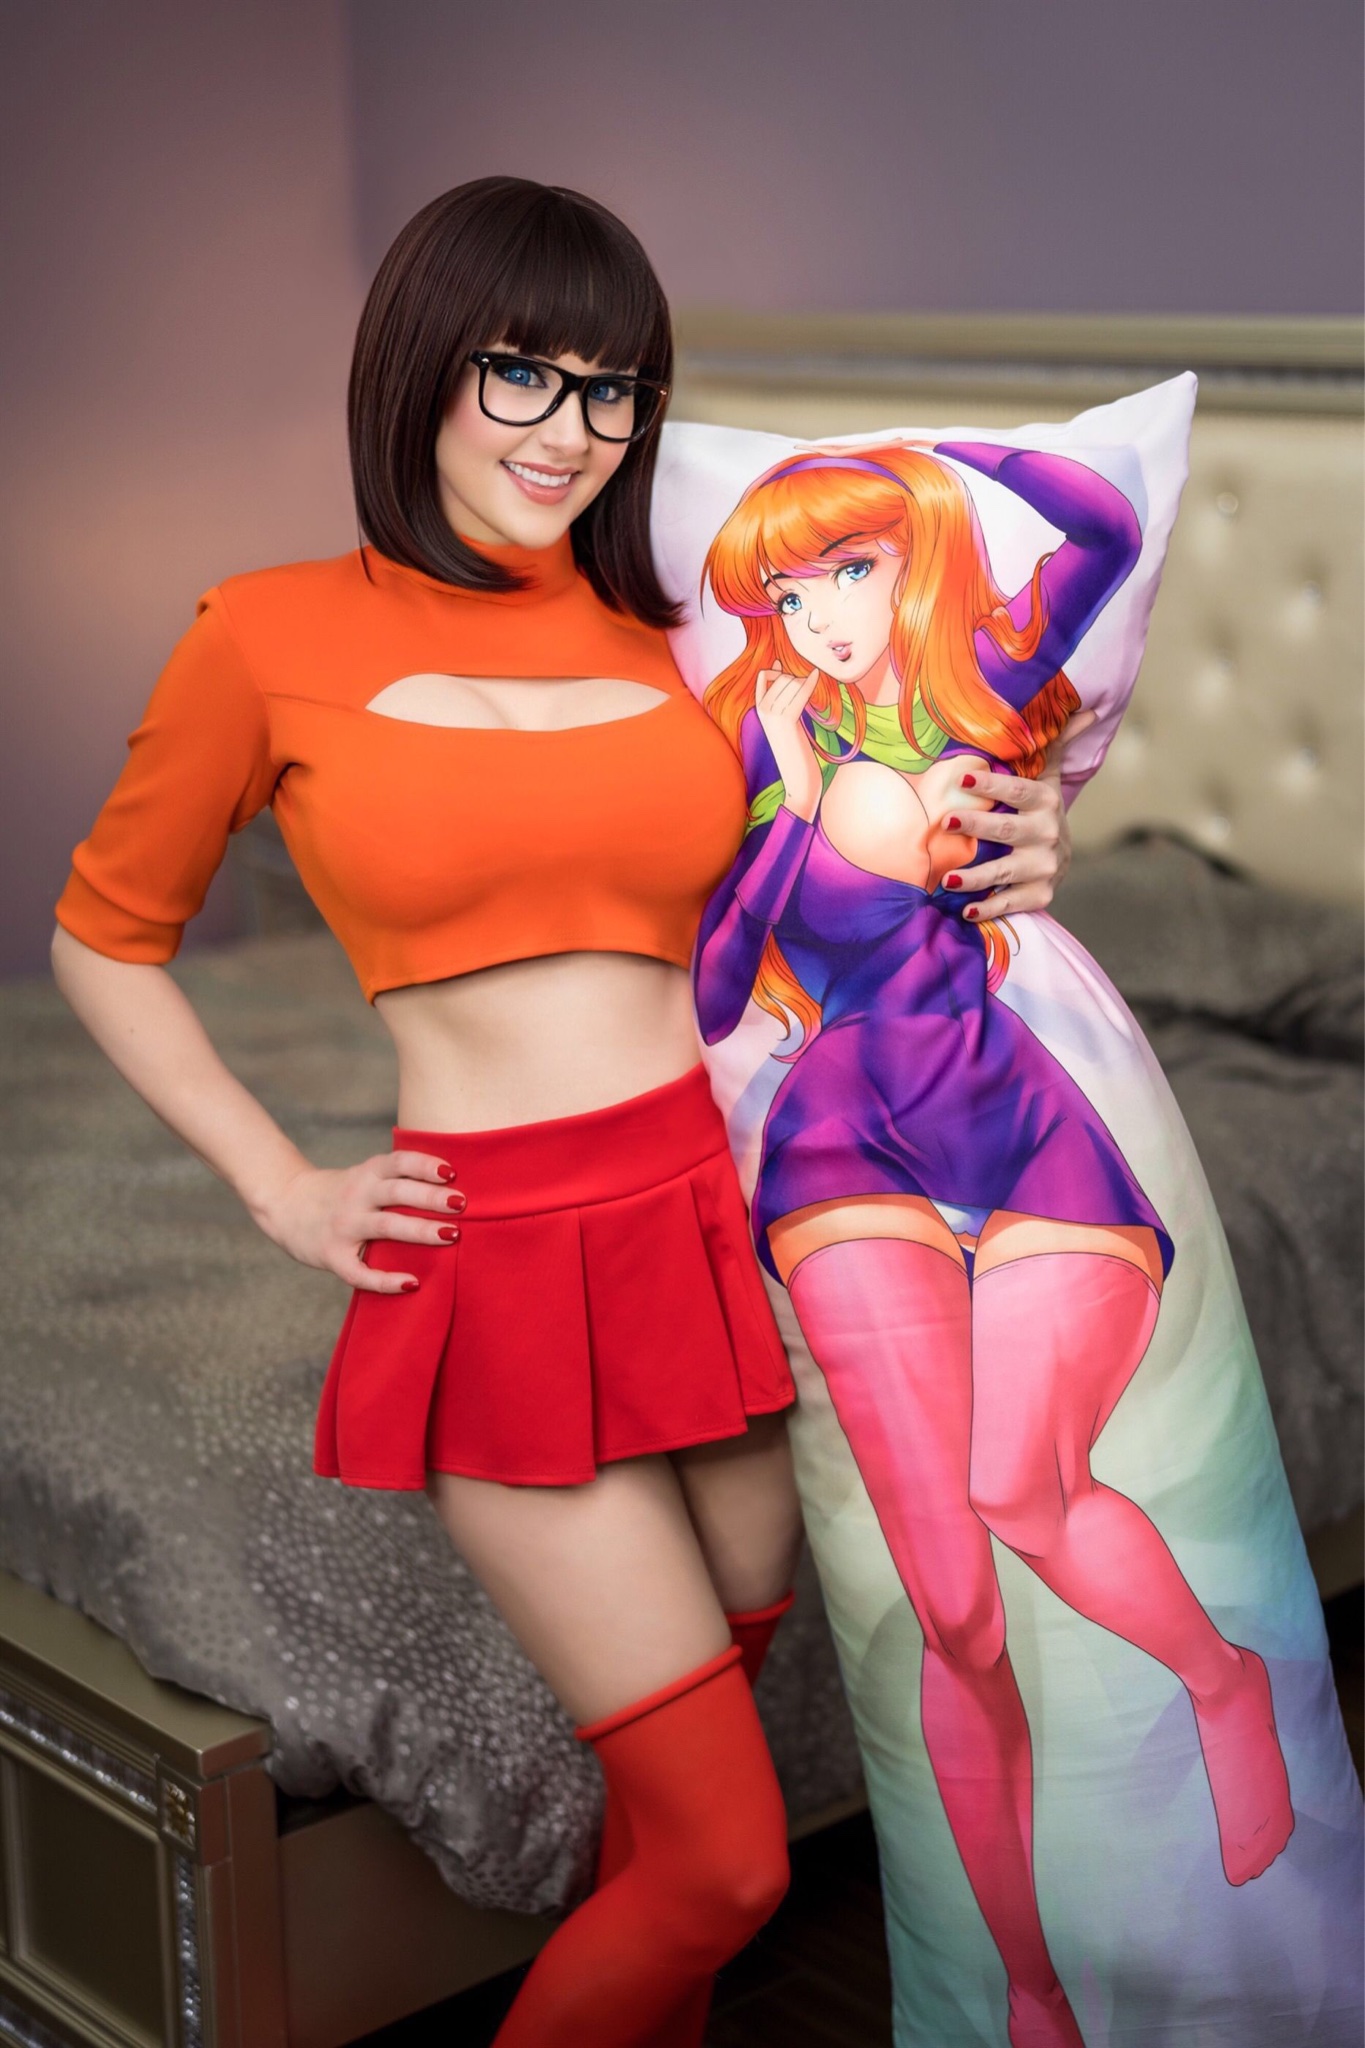 Angie Griffin on X: My very first Velma cosplay ❤️❤️ https